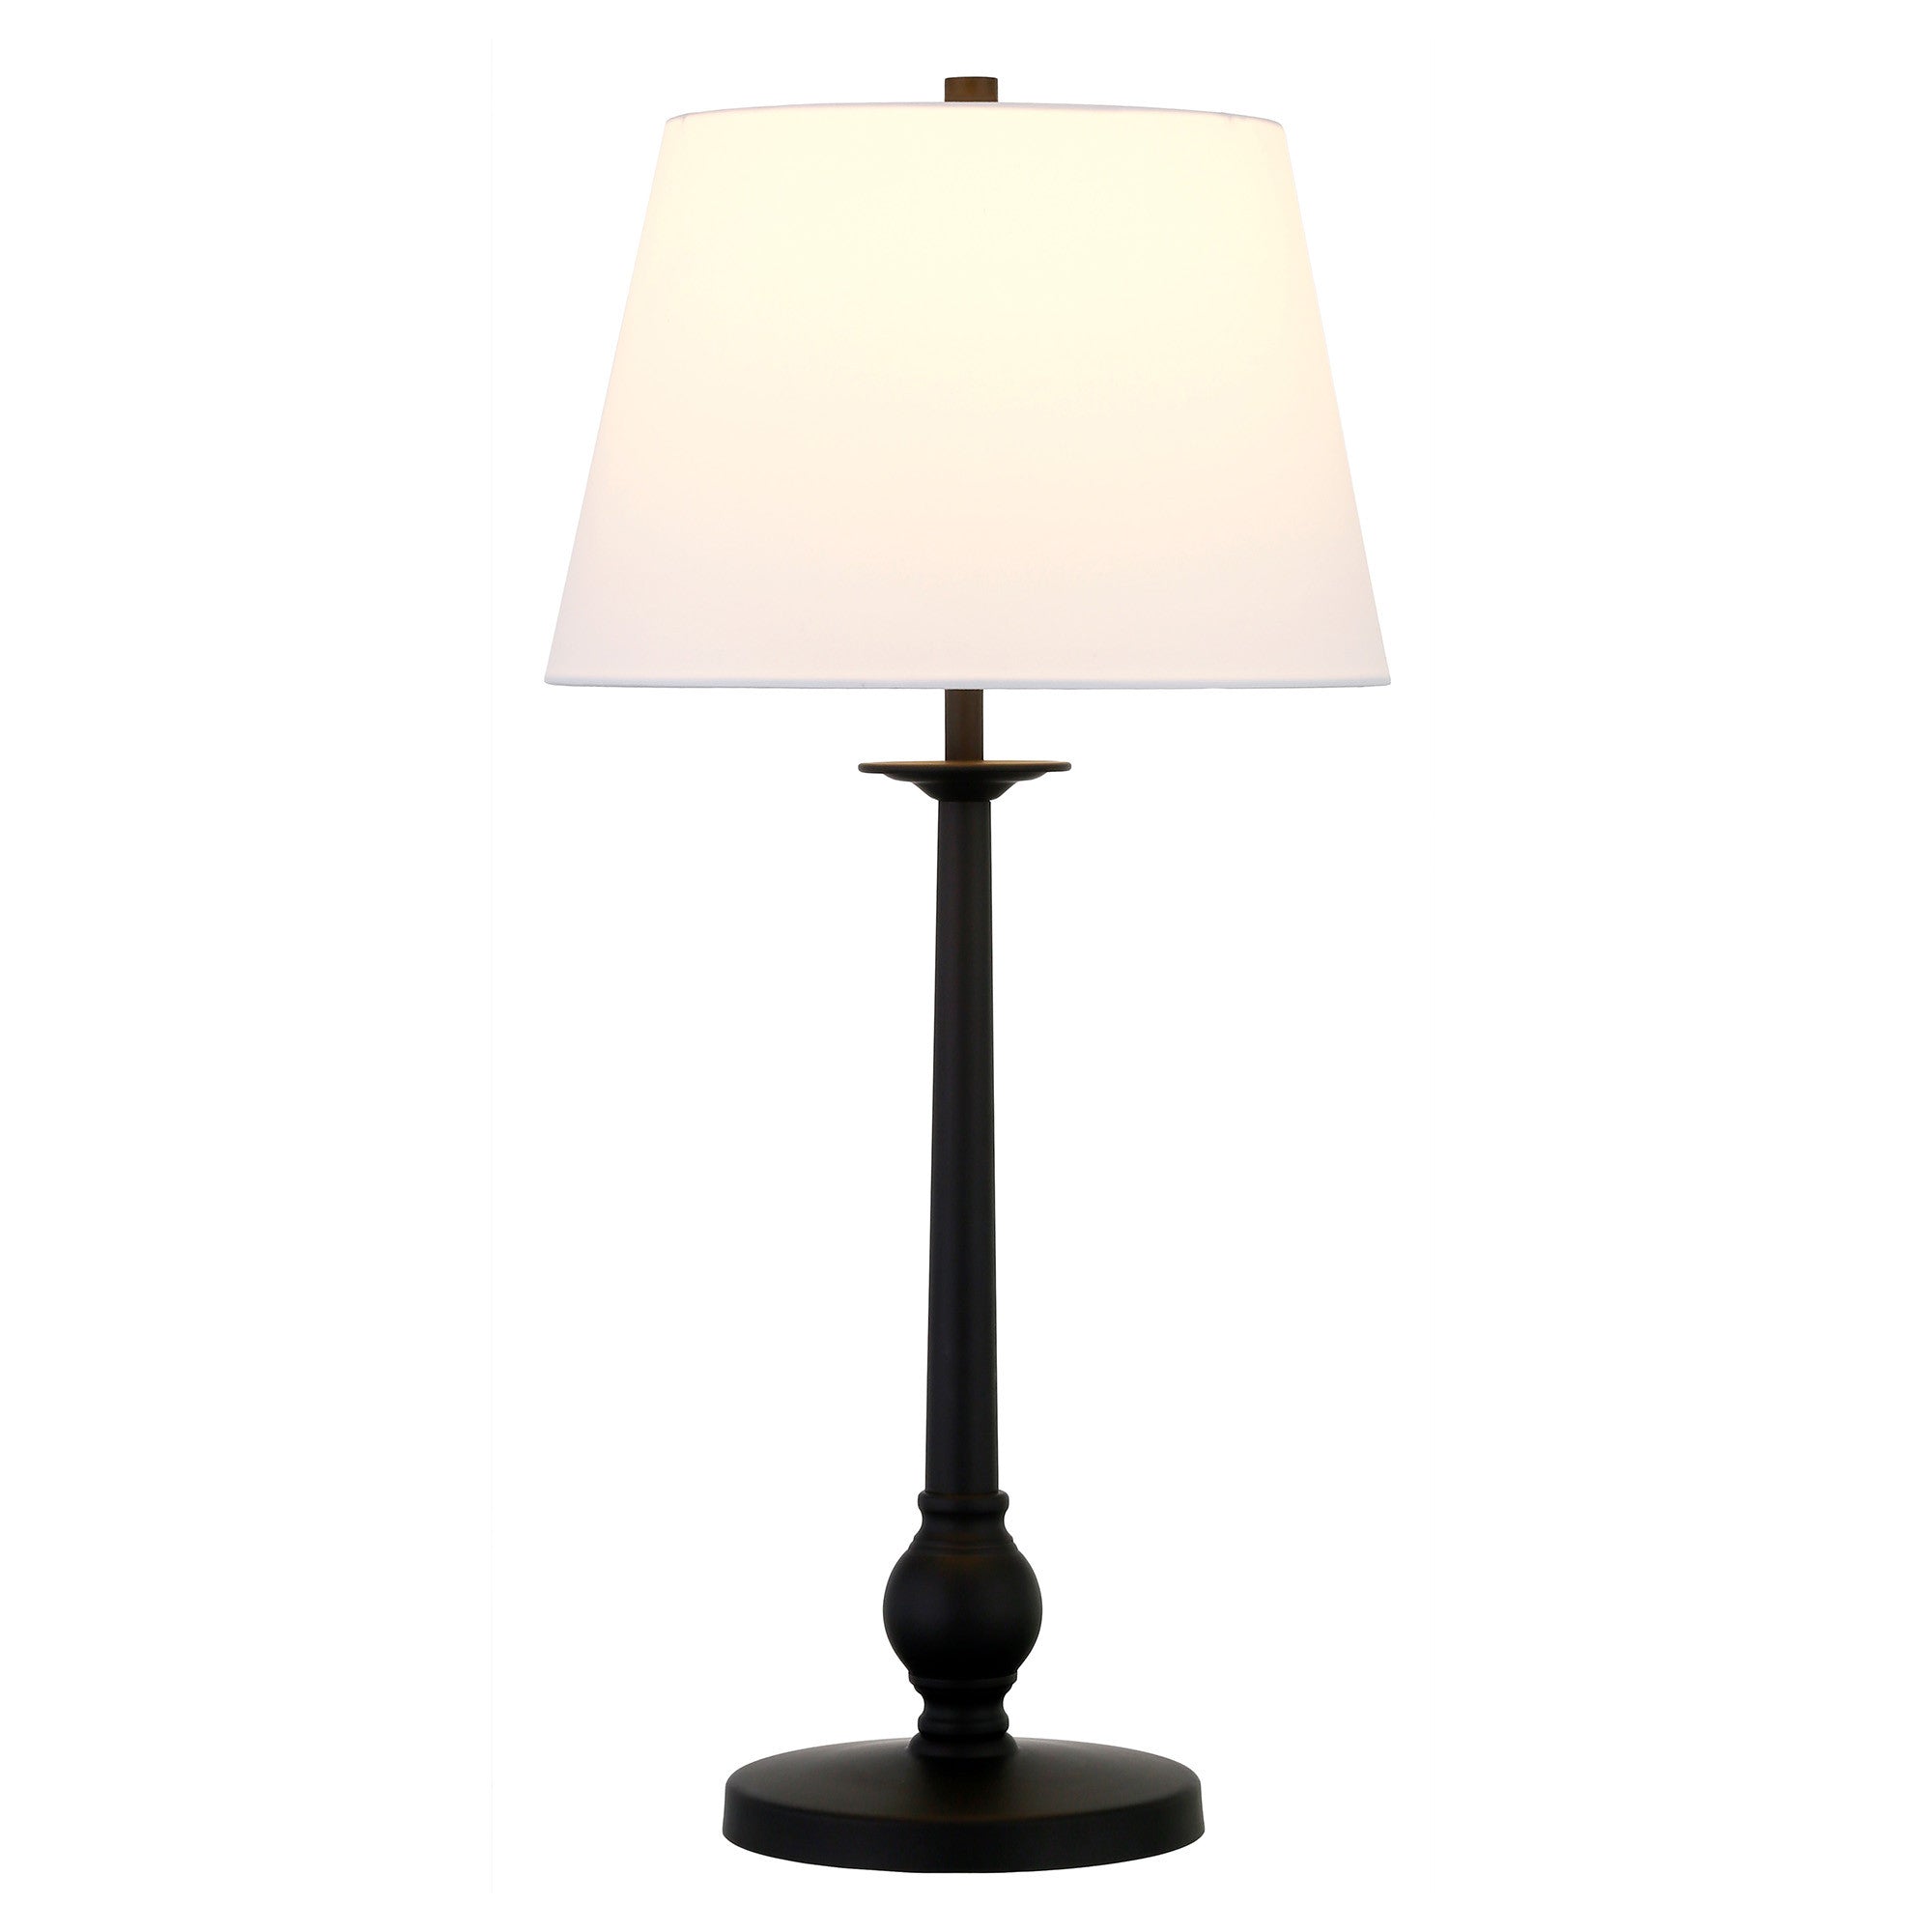 28" Black Metal Table Lamp With White Empire Shade